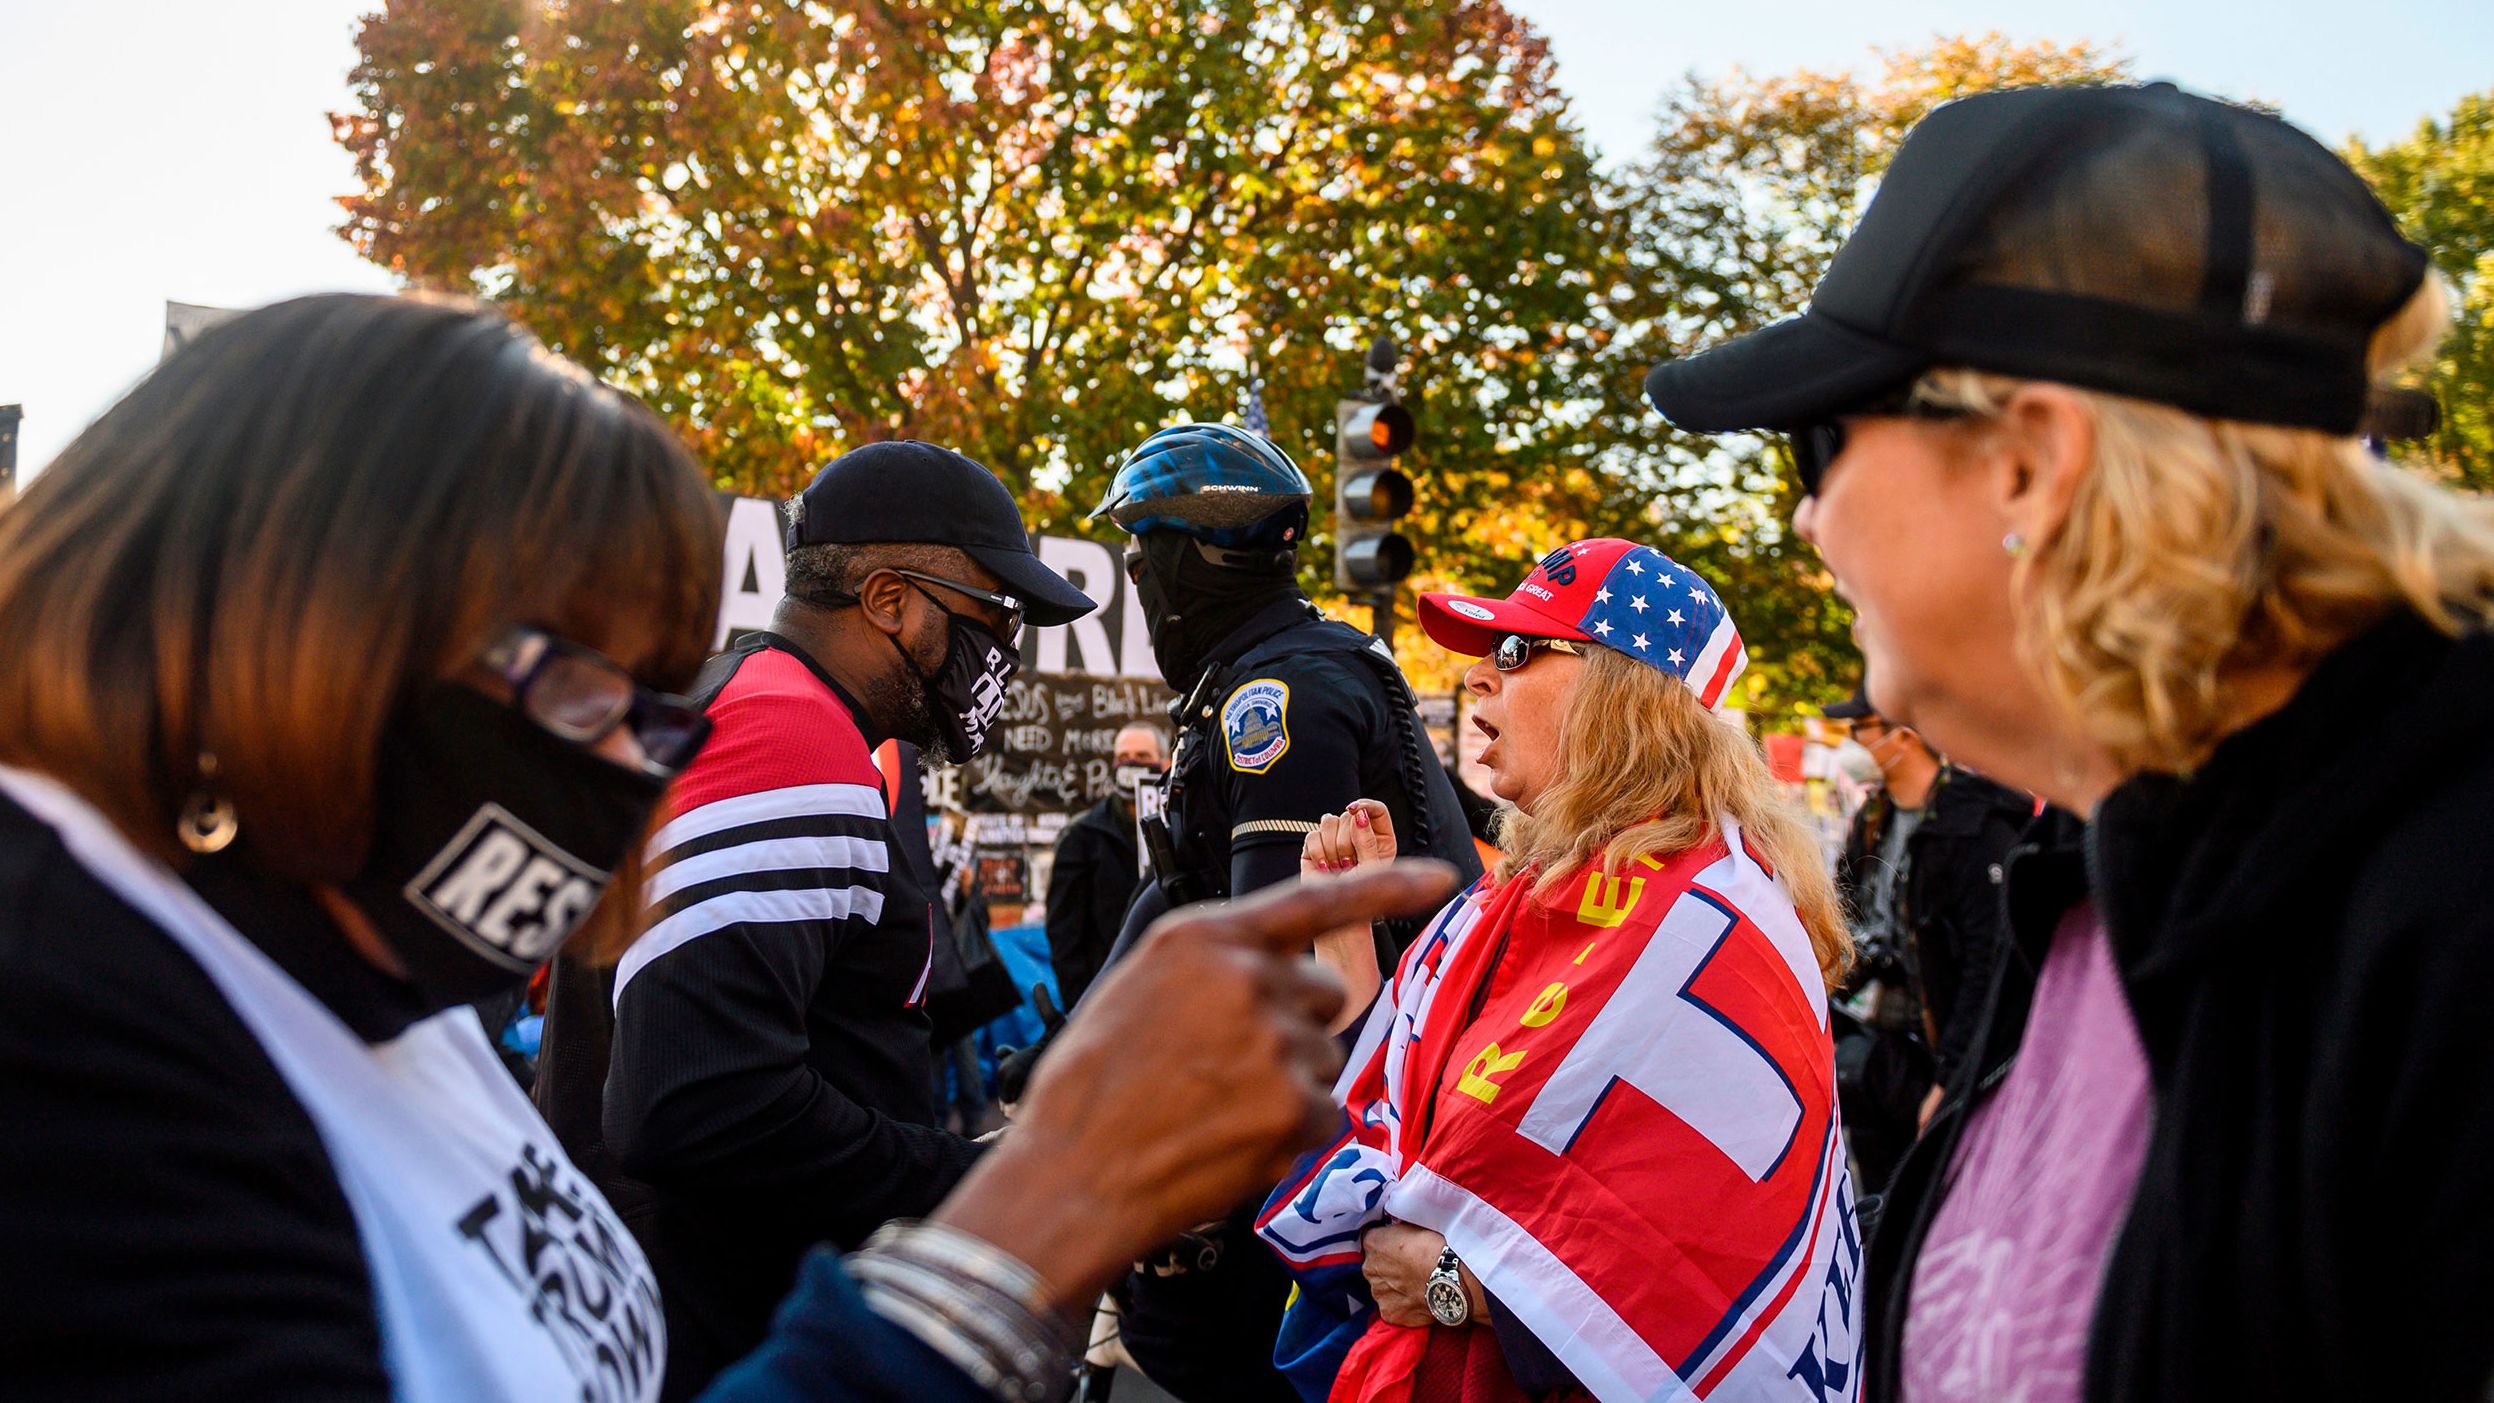 Supporters of Donald Trump and Joe Biden argue in front of the White House in Washington, DC, on November 13, 2020.